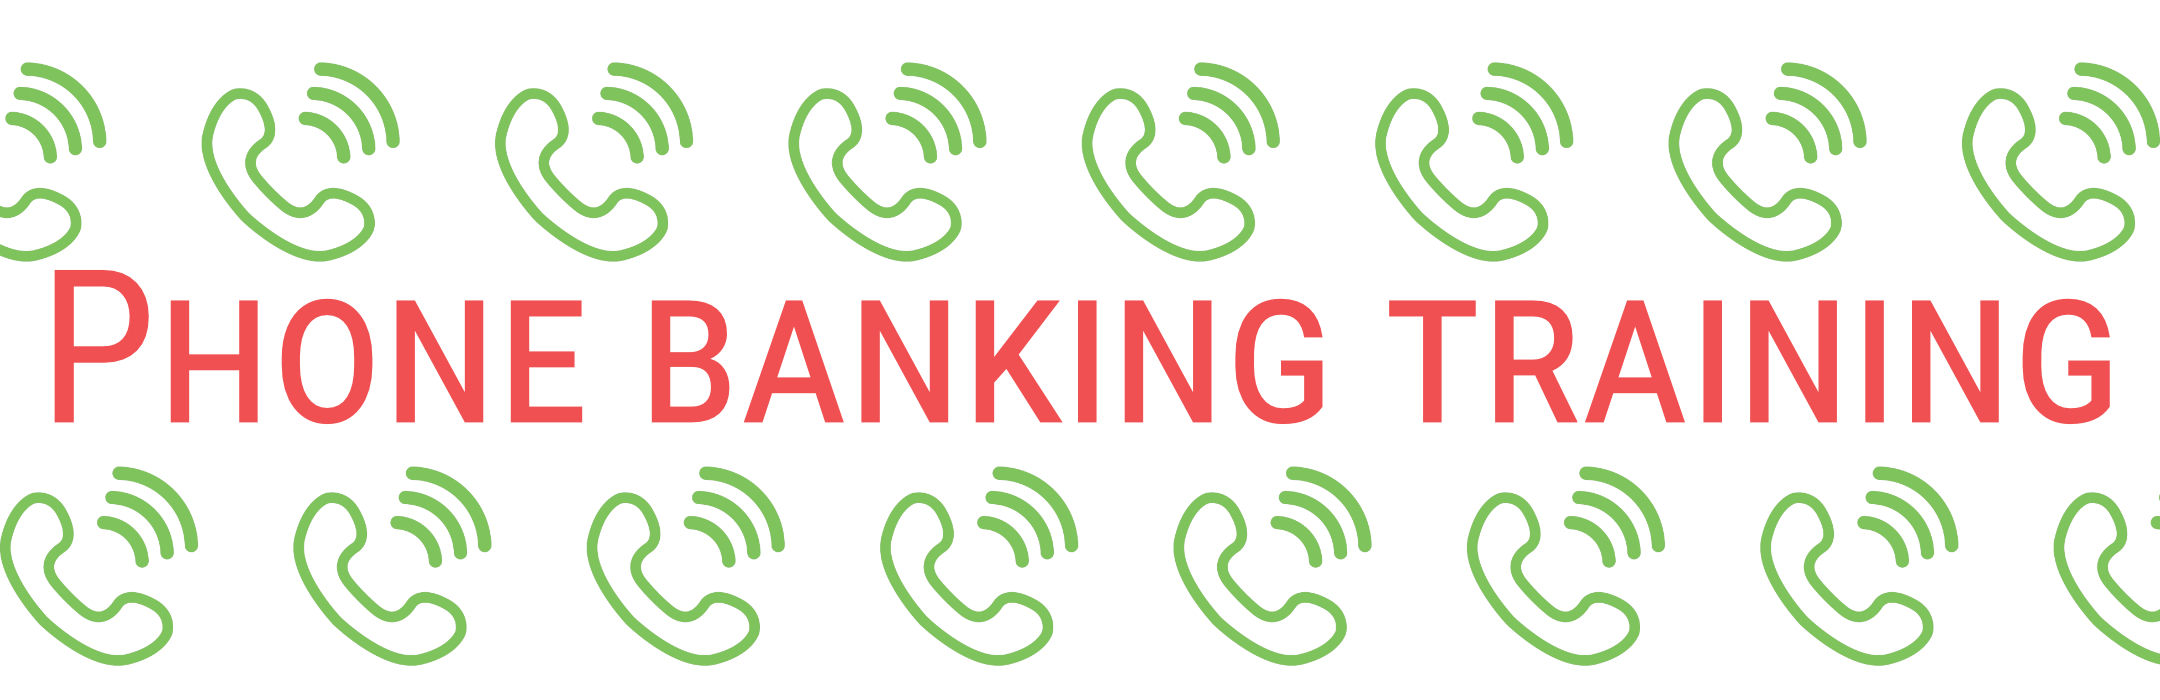 Phone Banking Training banner, featuring green phones and red text